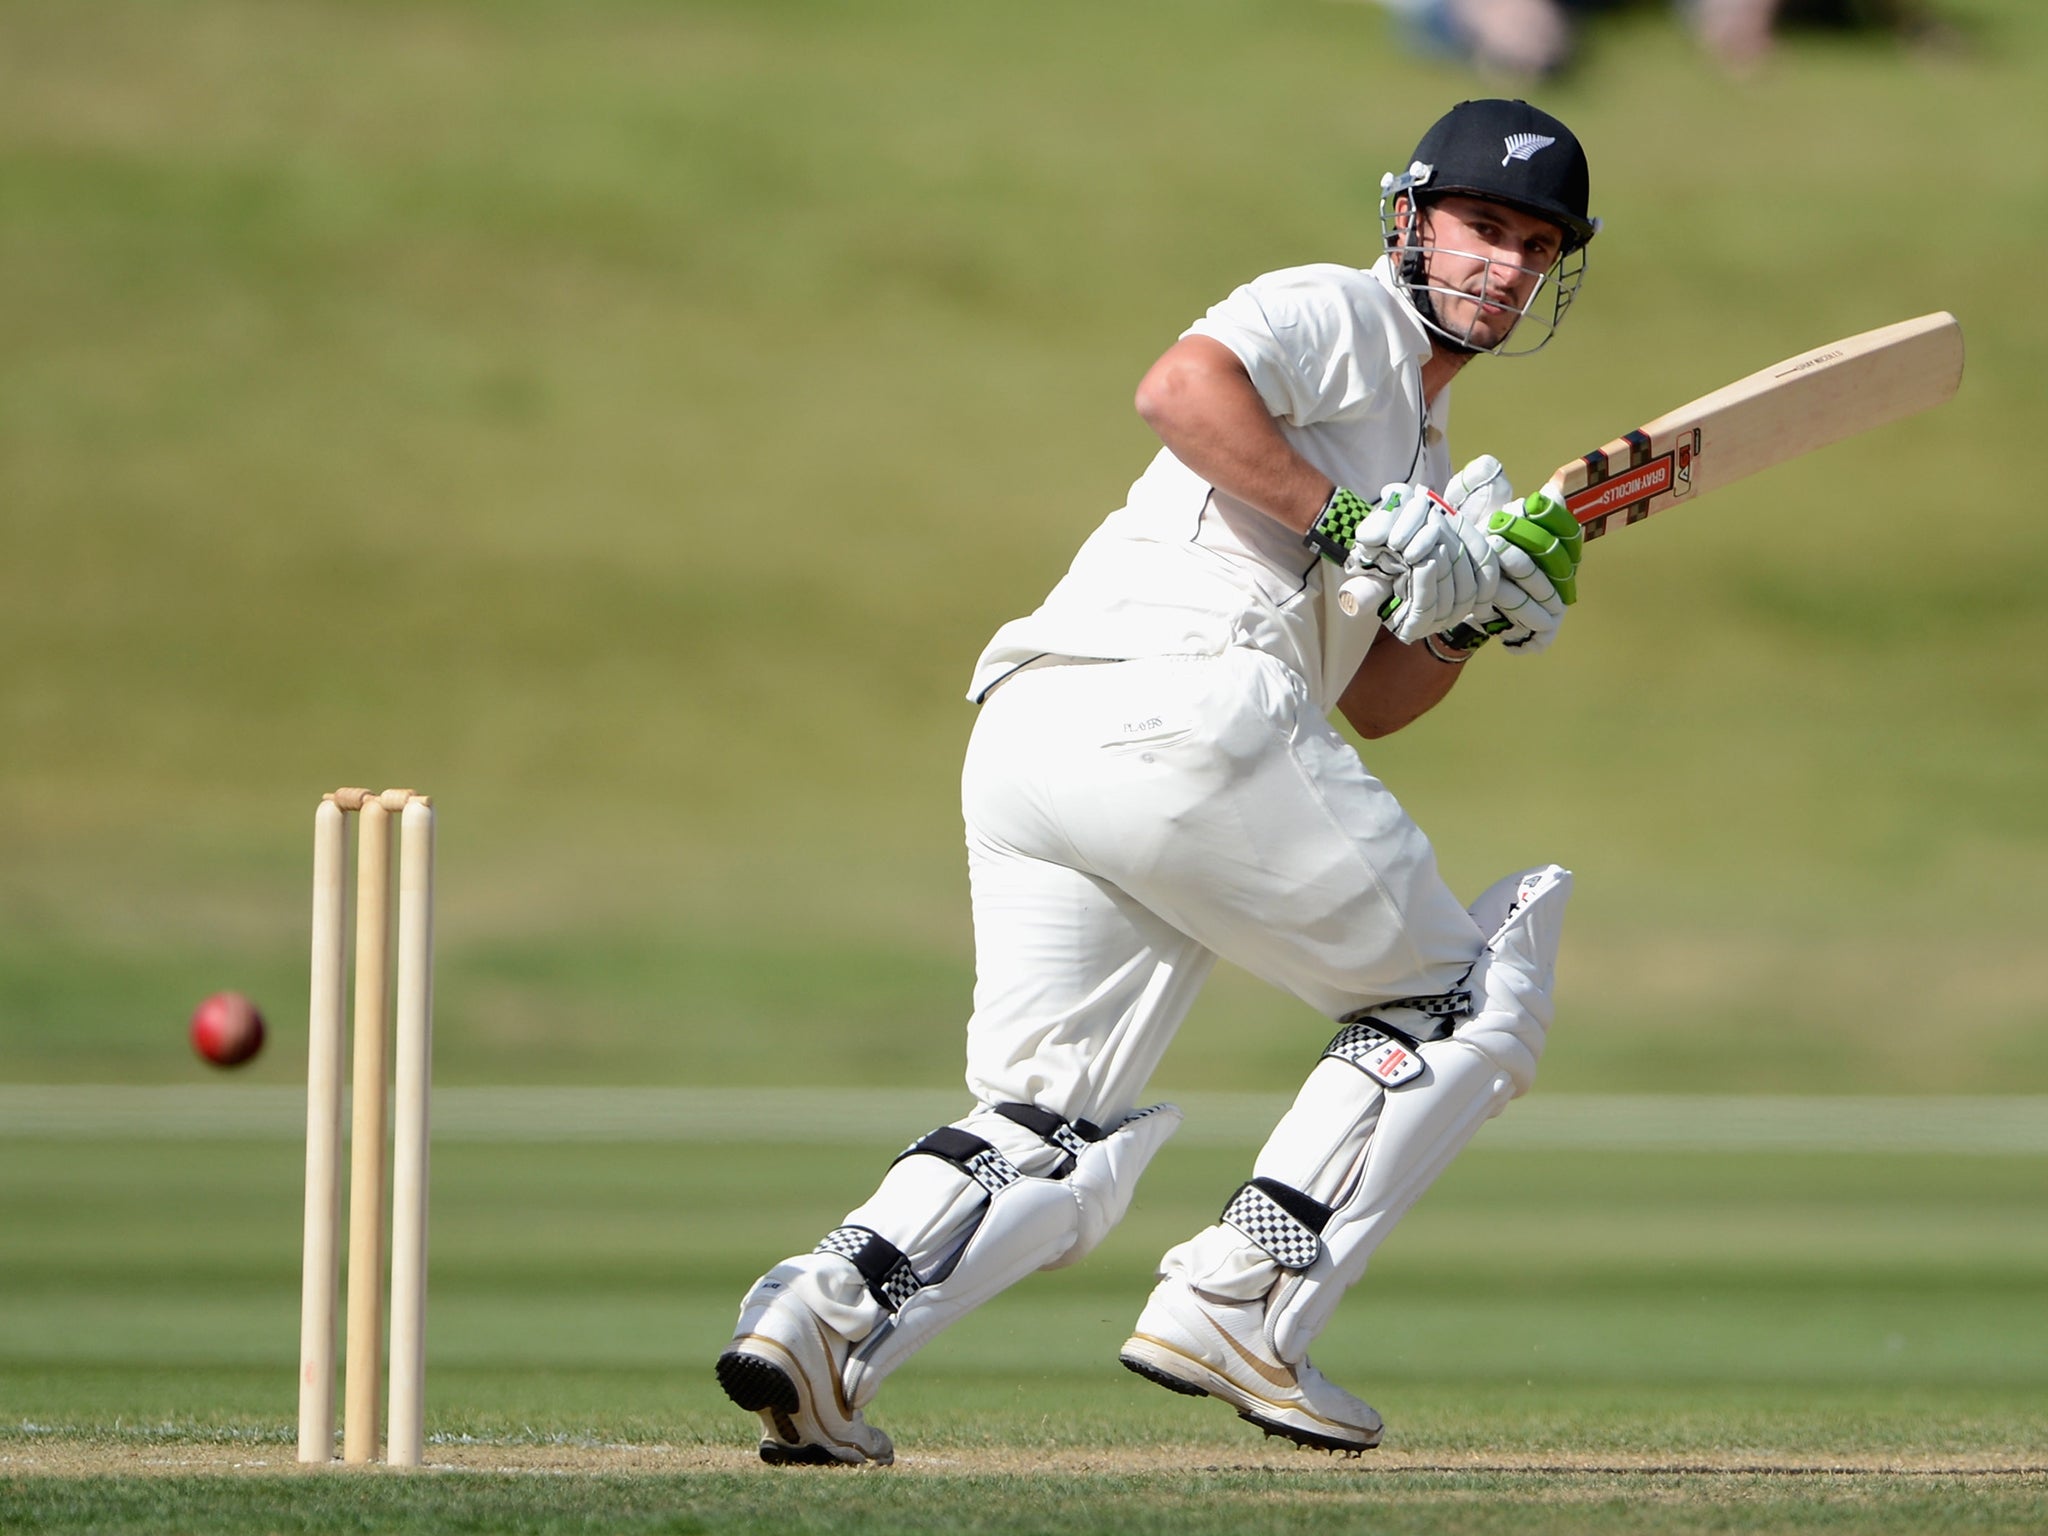 Hamish Rutherford provided the substance in New Zealand XI's 224 for six in reply to 426 all out